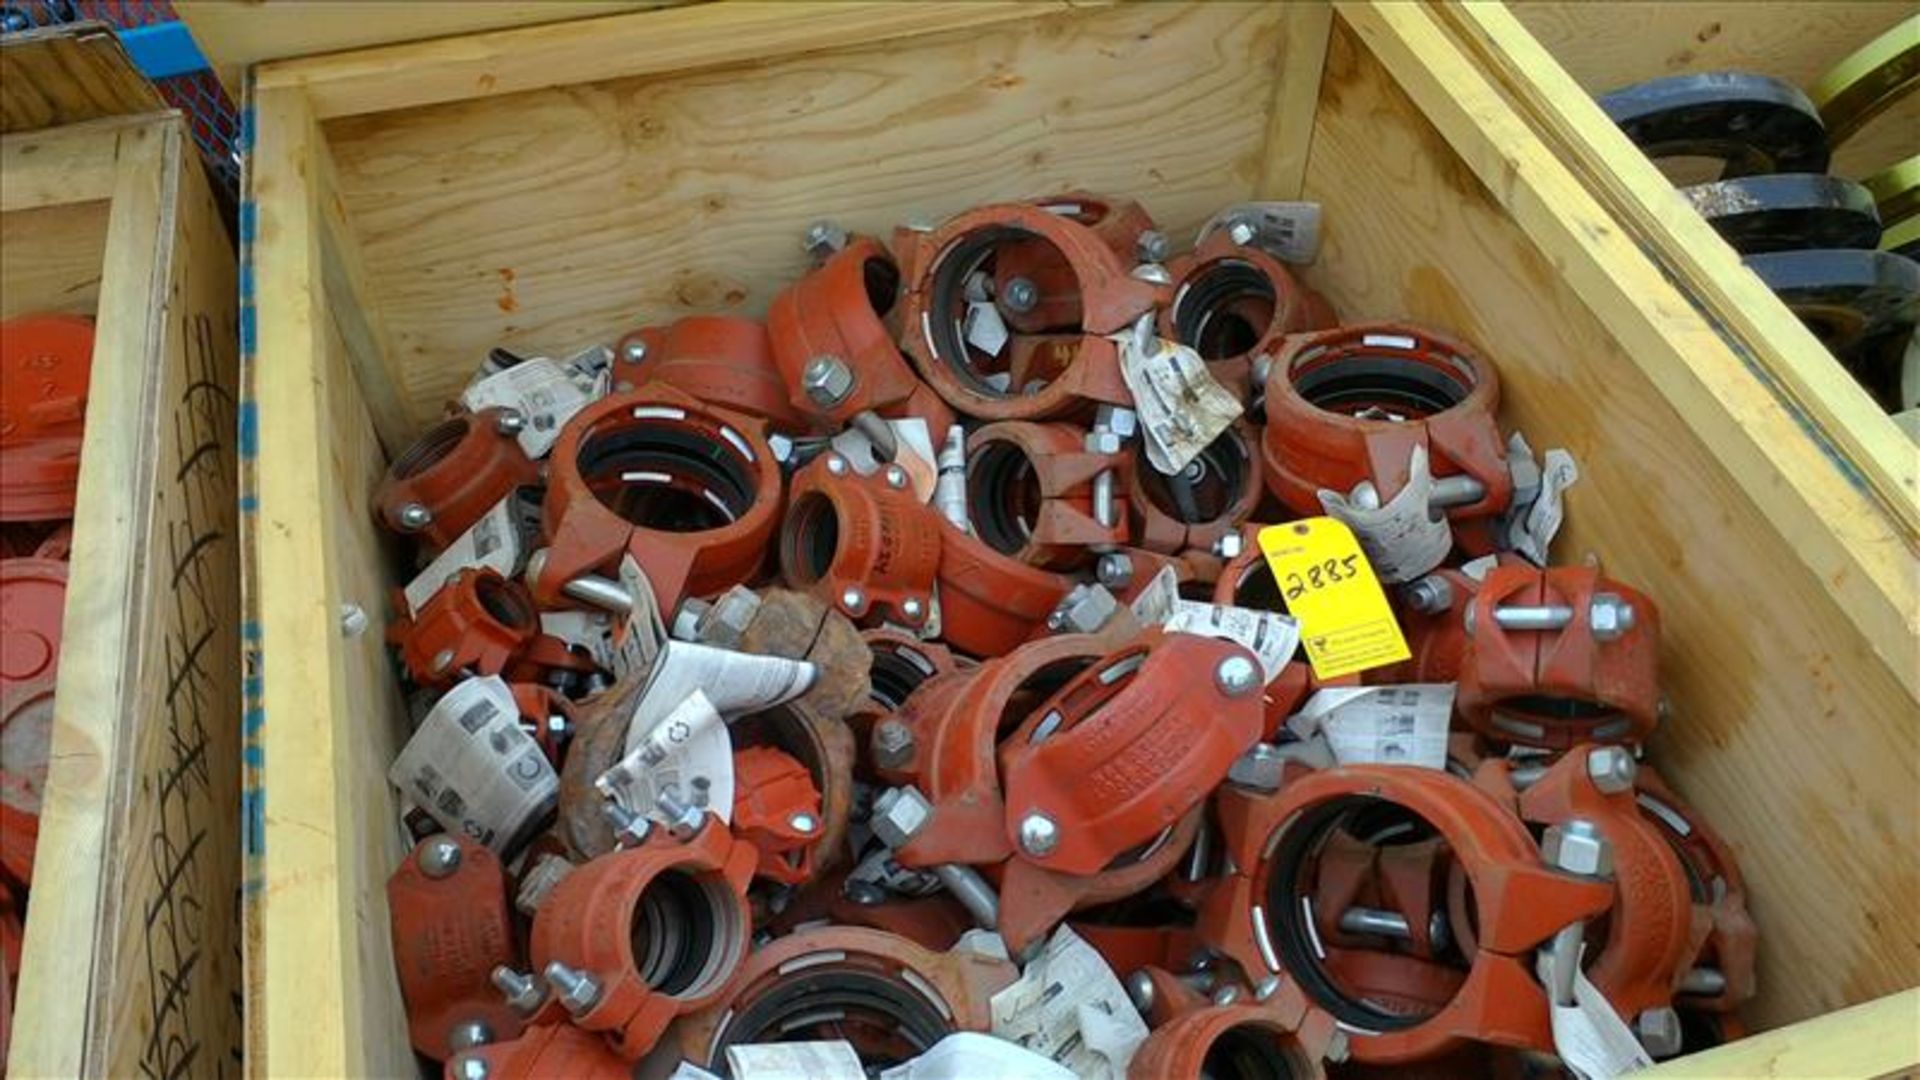 [2885] Contents incl.: 20 COUPLING: Transition, 4 IN, HDPE to Pipe 43 COUPLING: Pipe, Vic, Type 99,